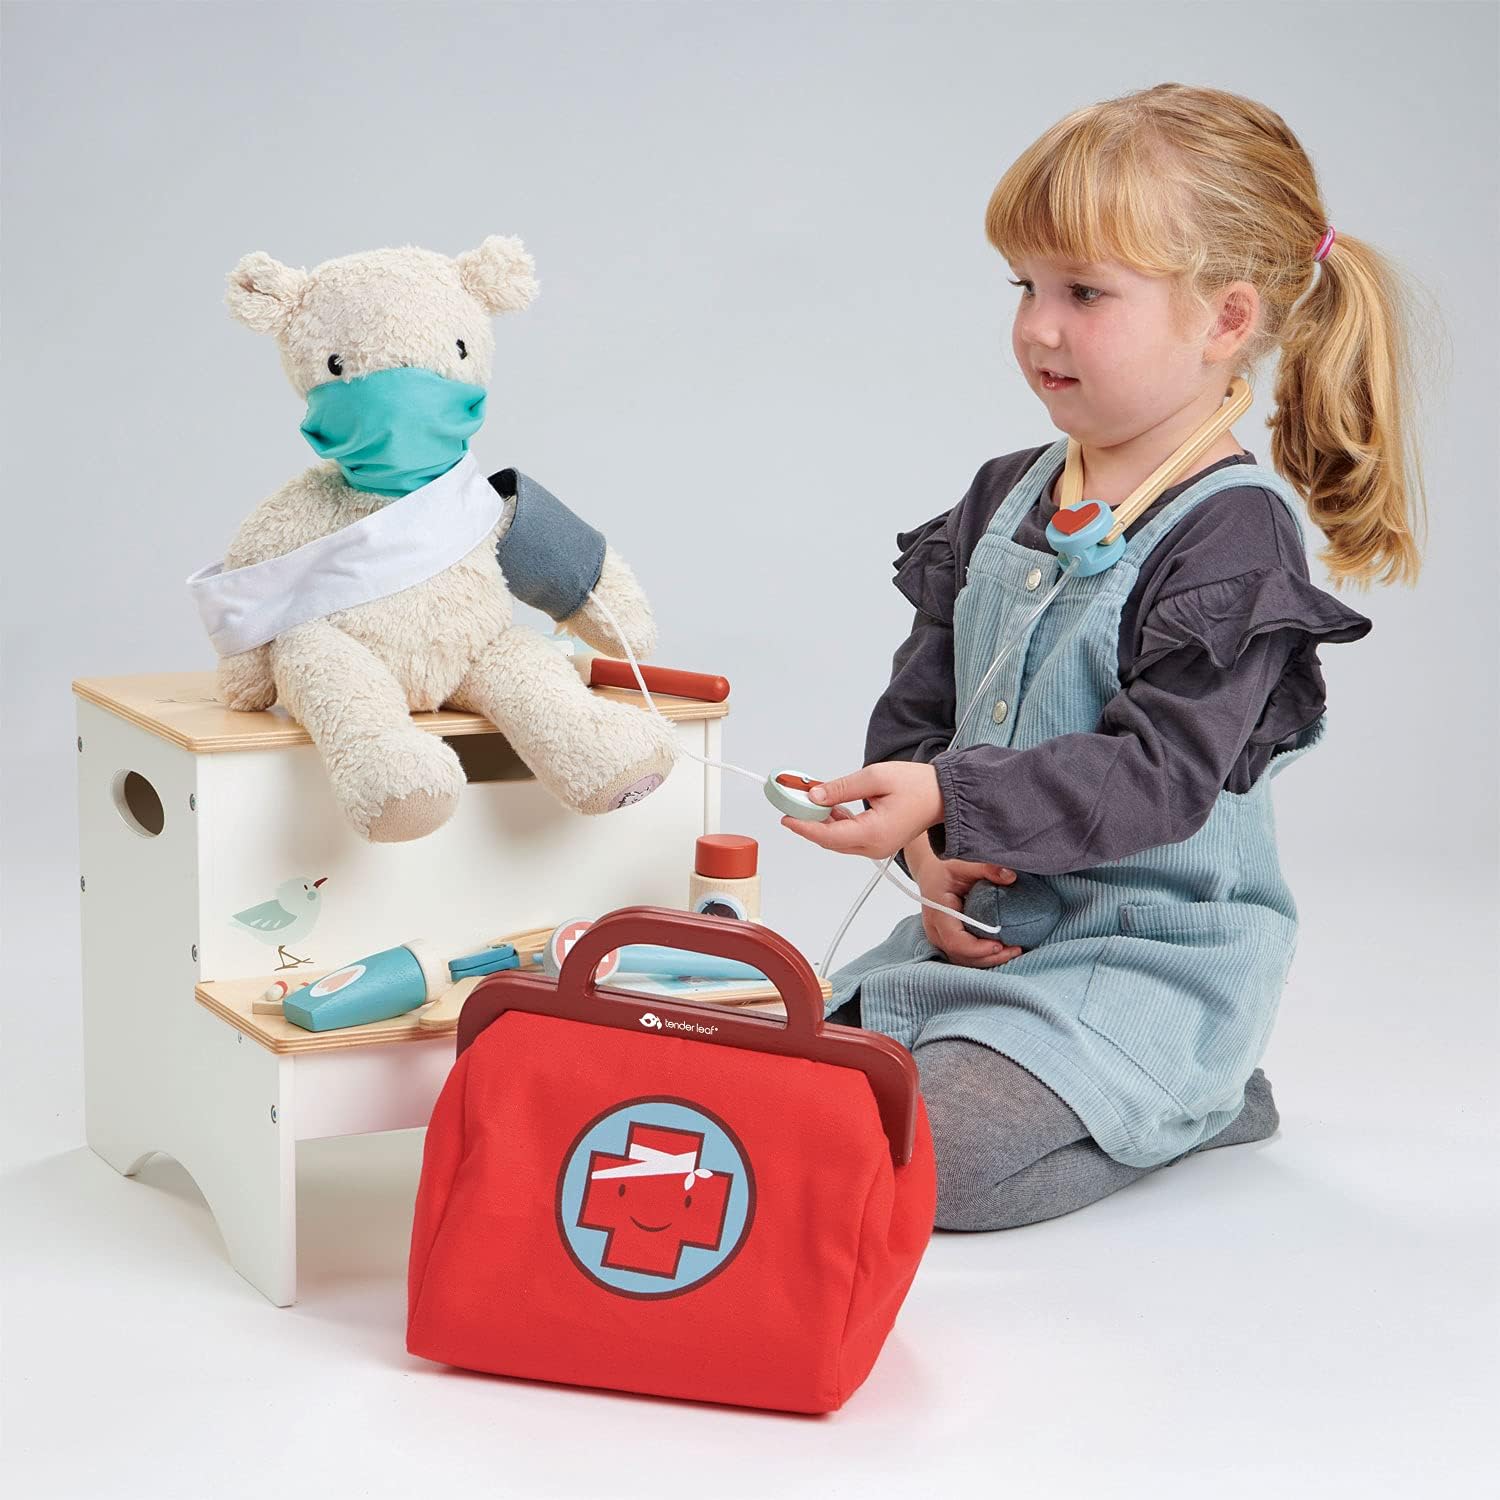 Tender Leaf Toys: A medical set with a trunk